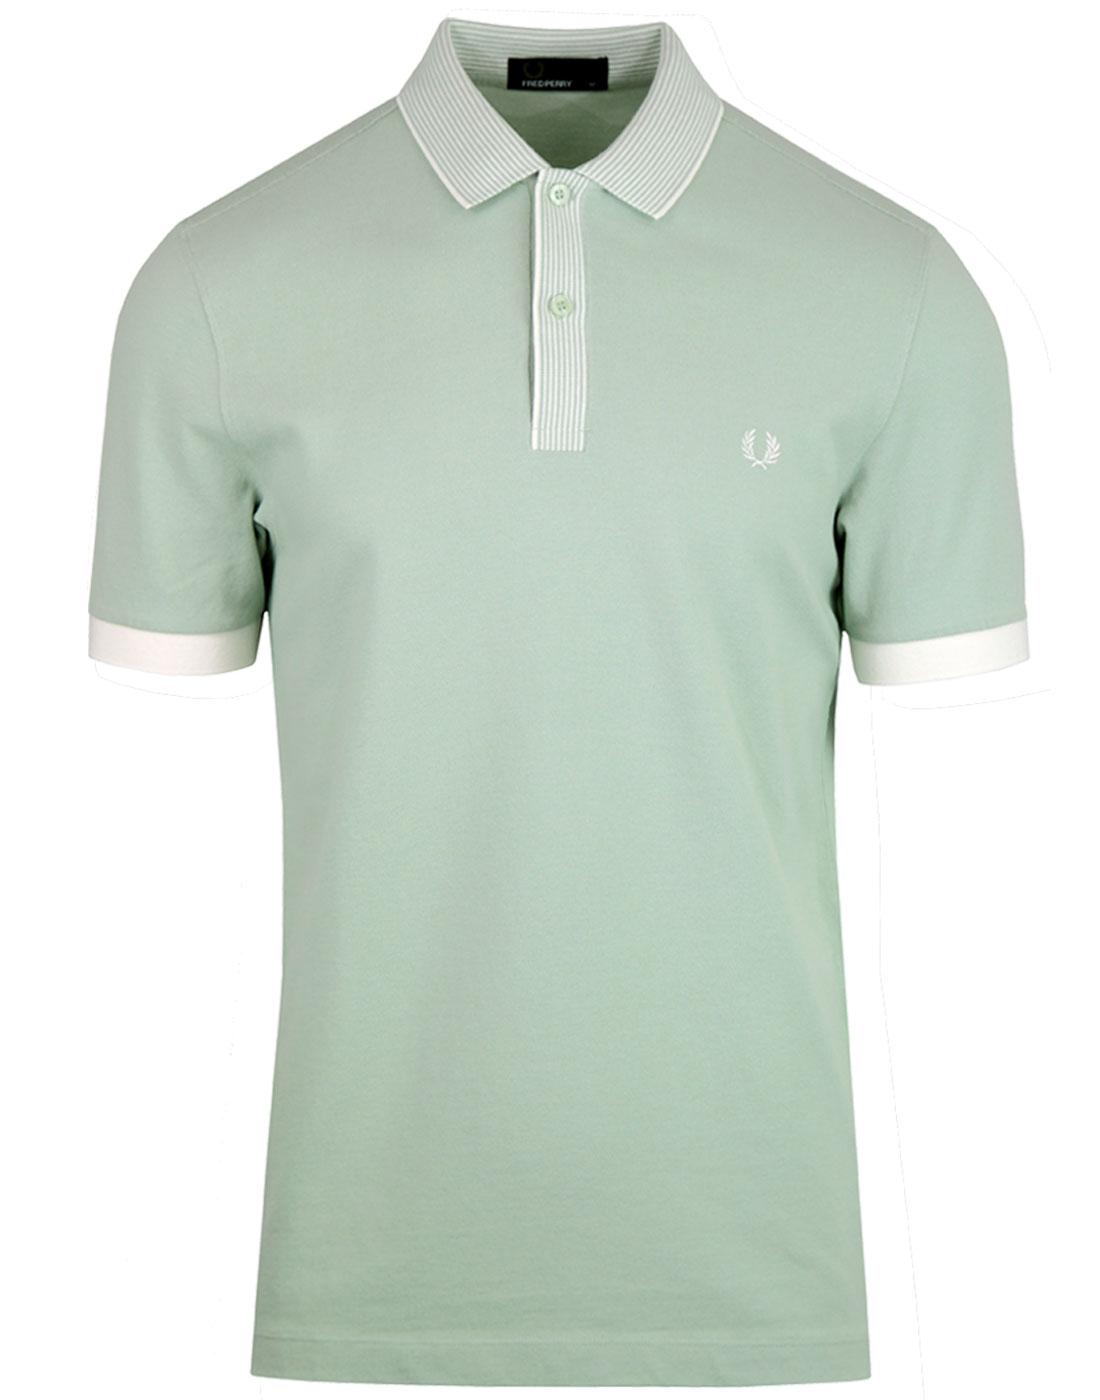 FRED PERRY Men's Stripe Trim Pique Polo in Mint